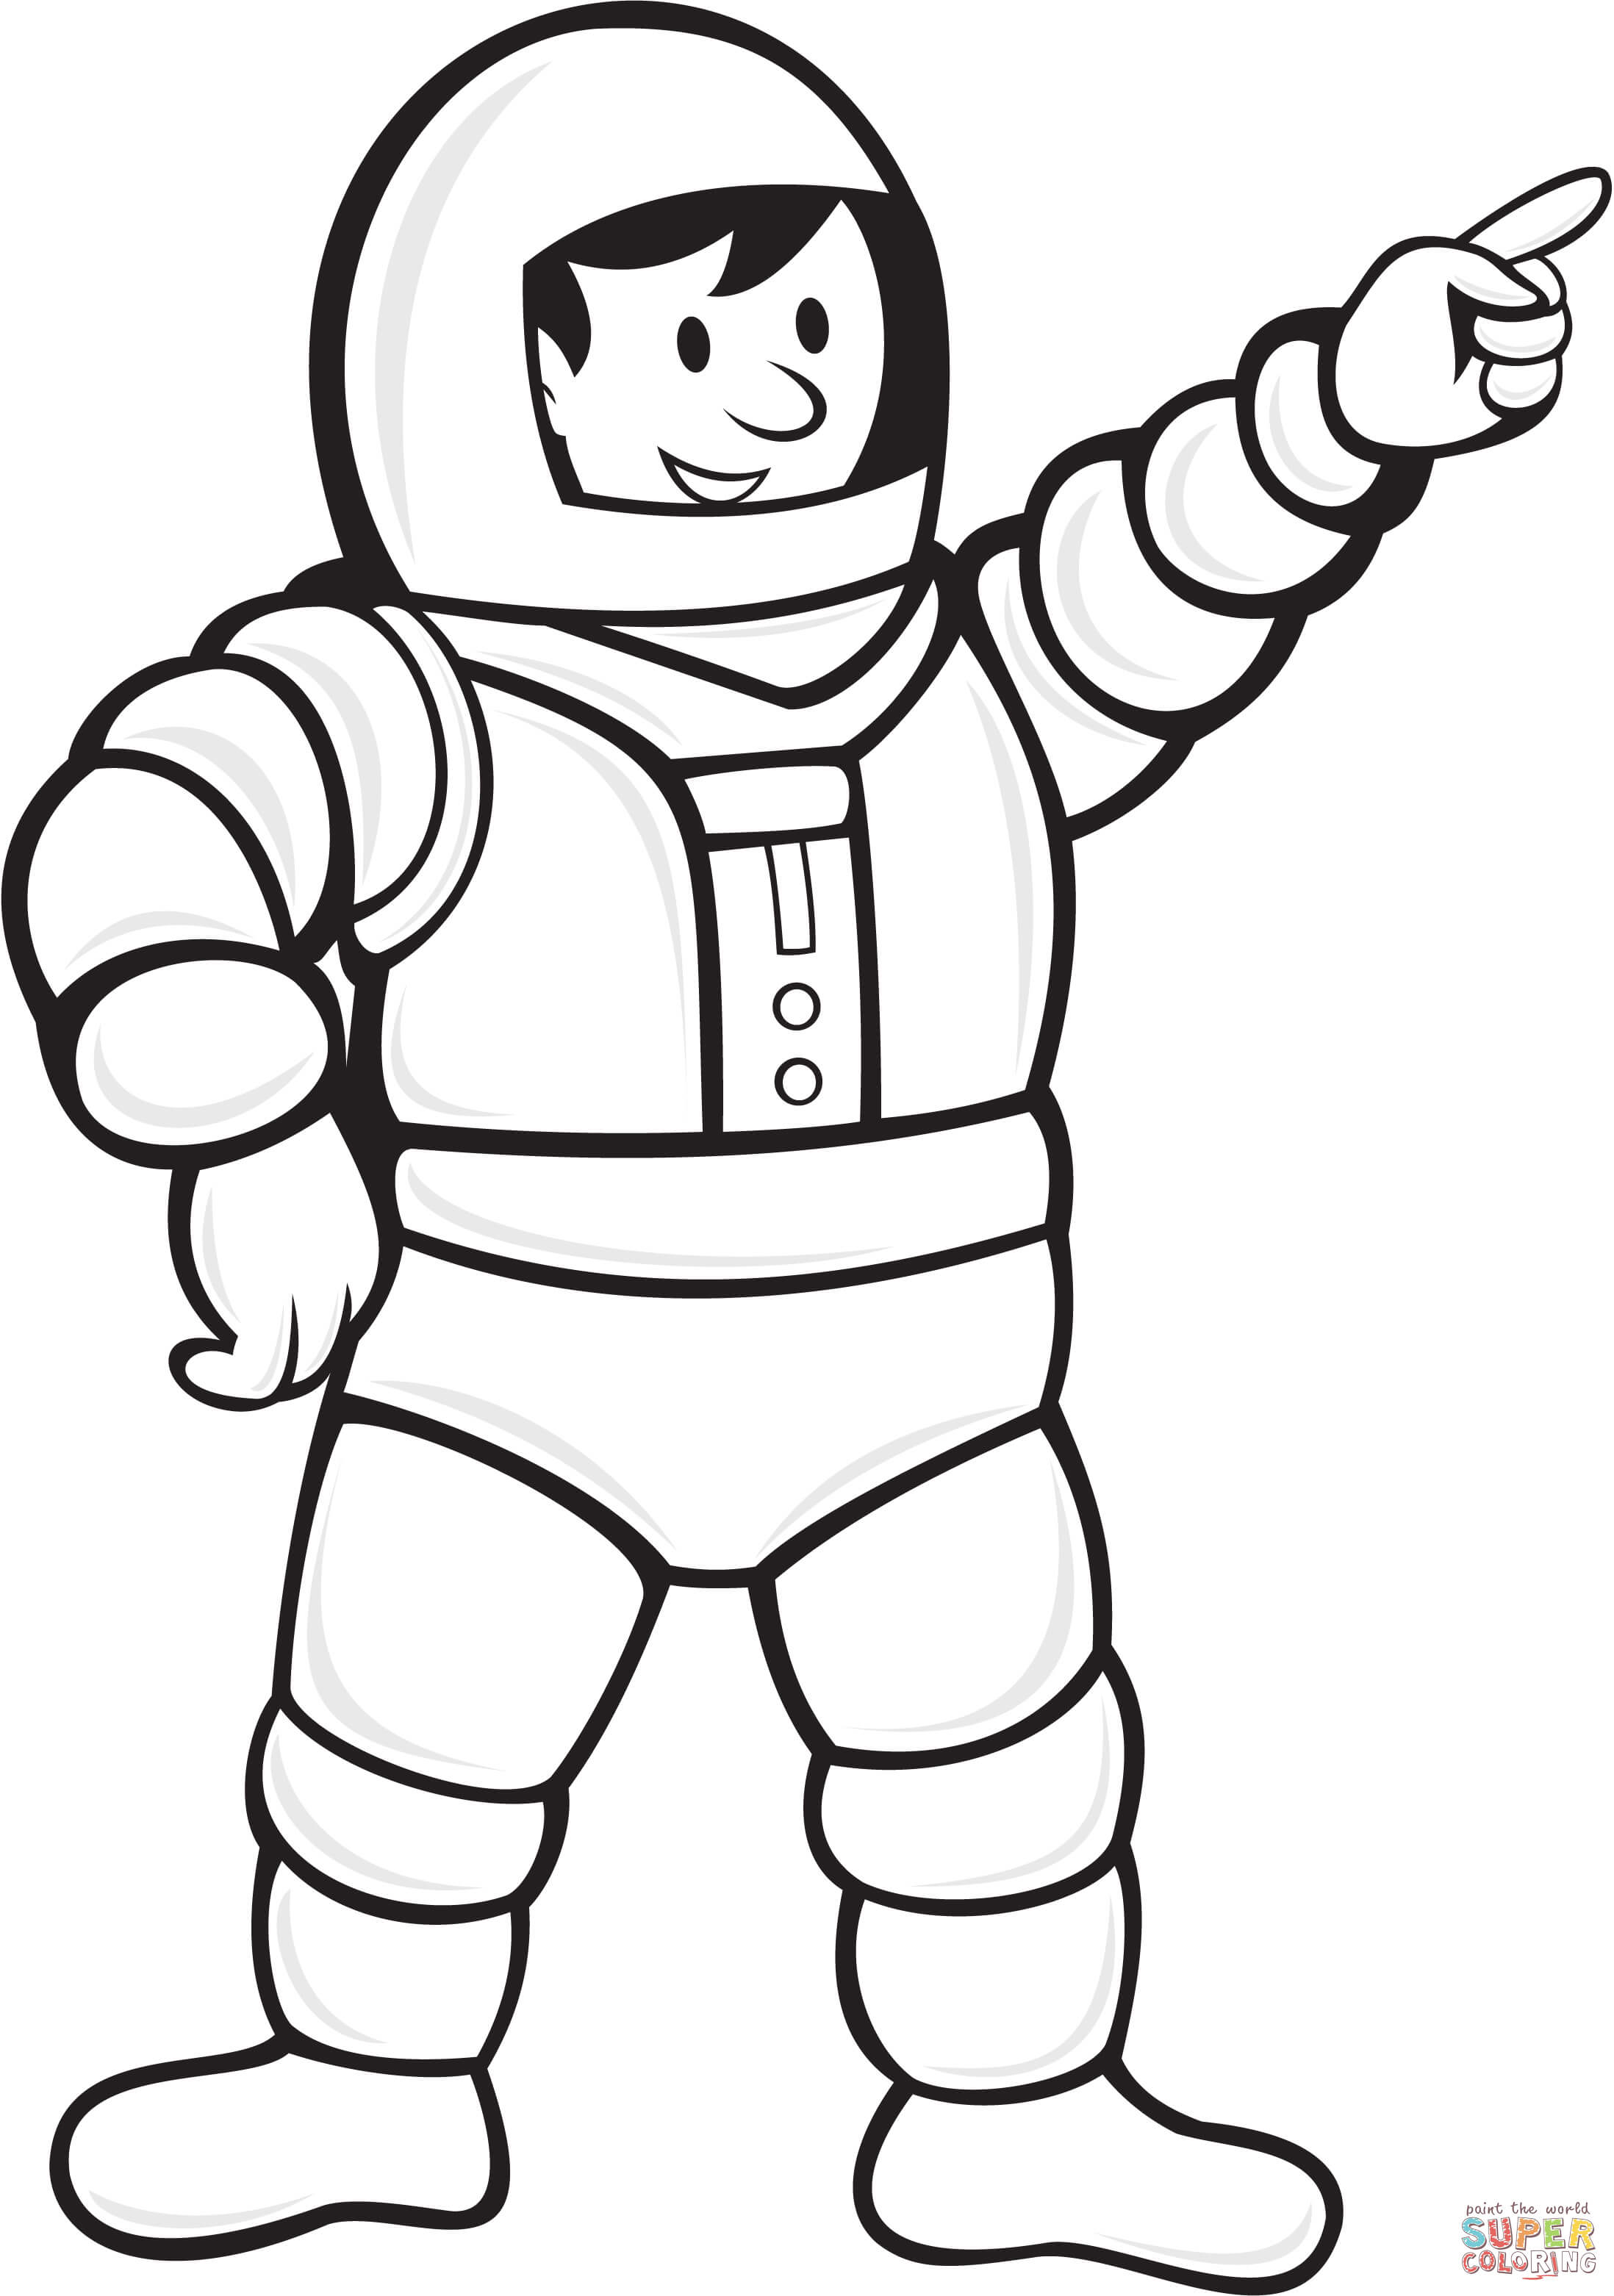 Astronaut coloring #15, Download drawings